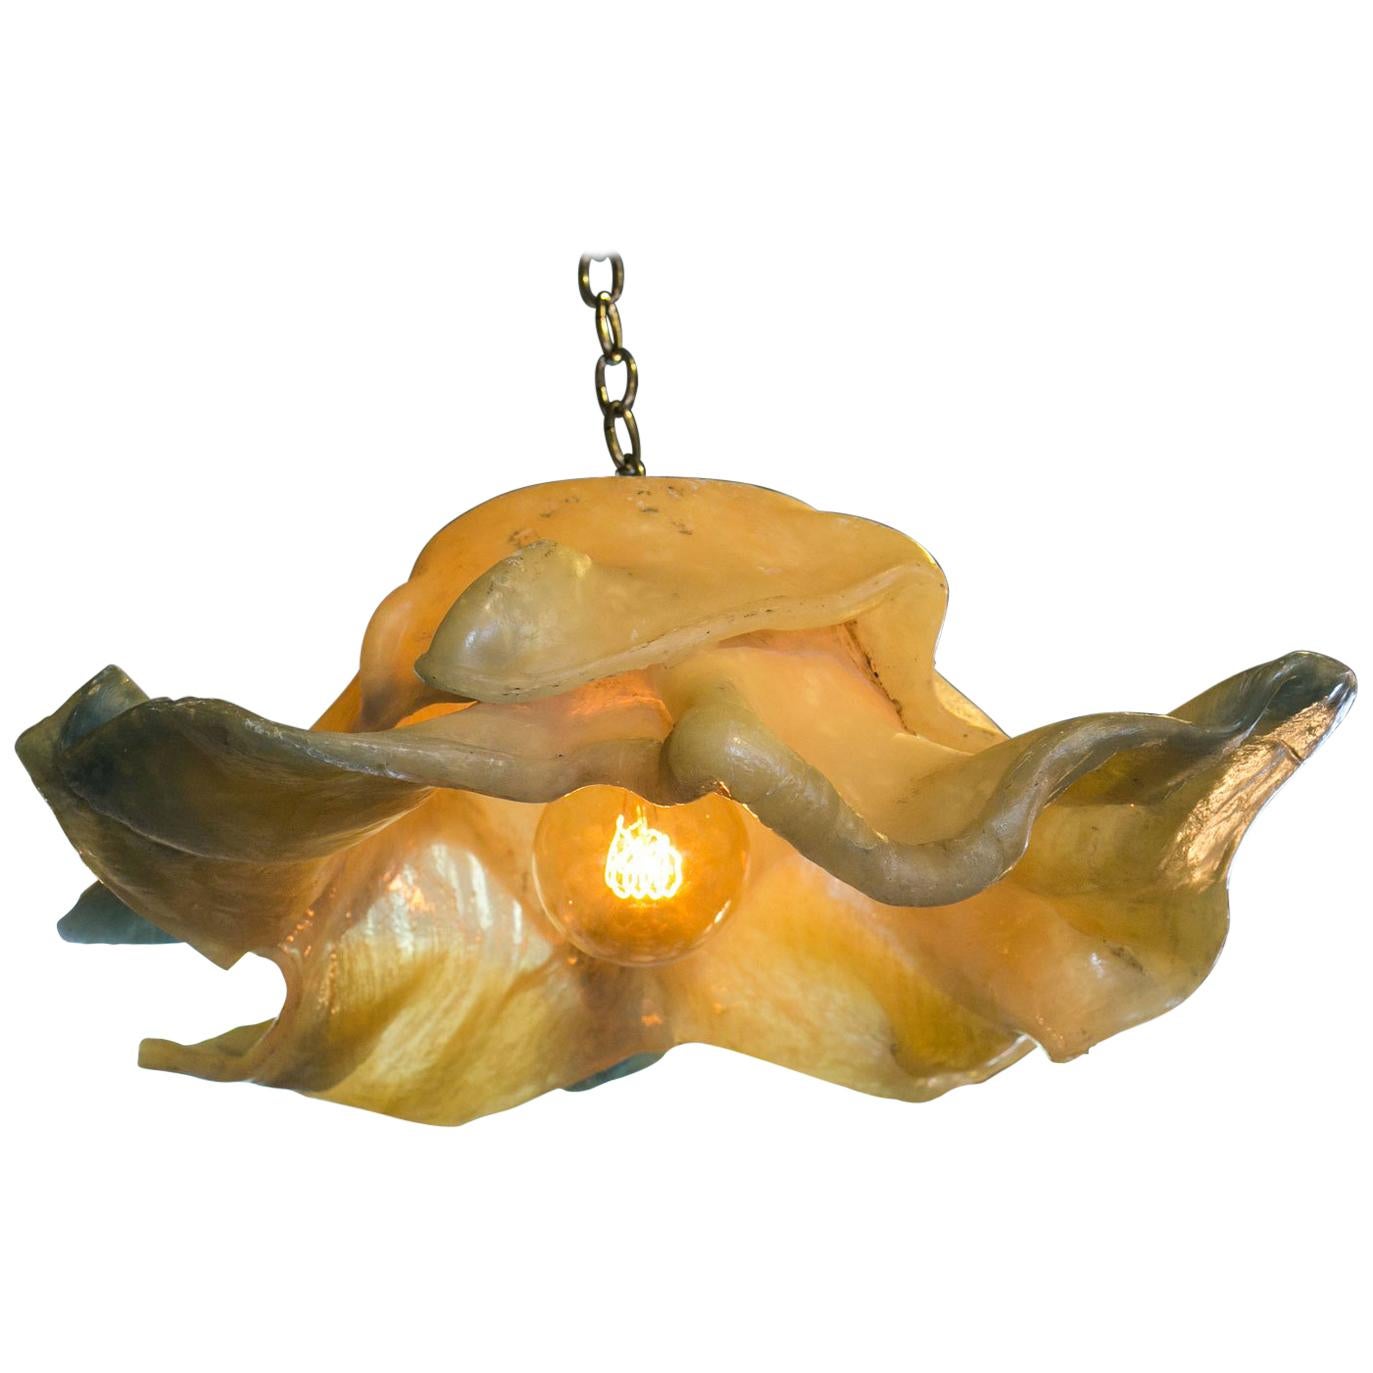 Unique modern fiberglass pendant light from Belgium. Hand-molded in an organic modern style from fiberglass. Nice, larger scale size. Color is more off-white neutral but a warm light will illuminate this fixture in a warm, amber or ochre hue (like a